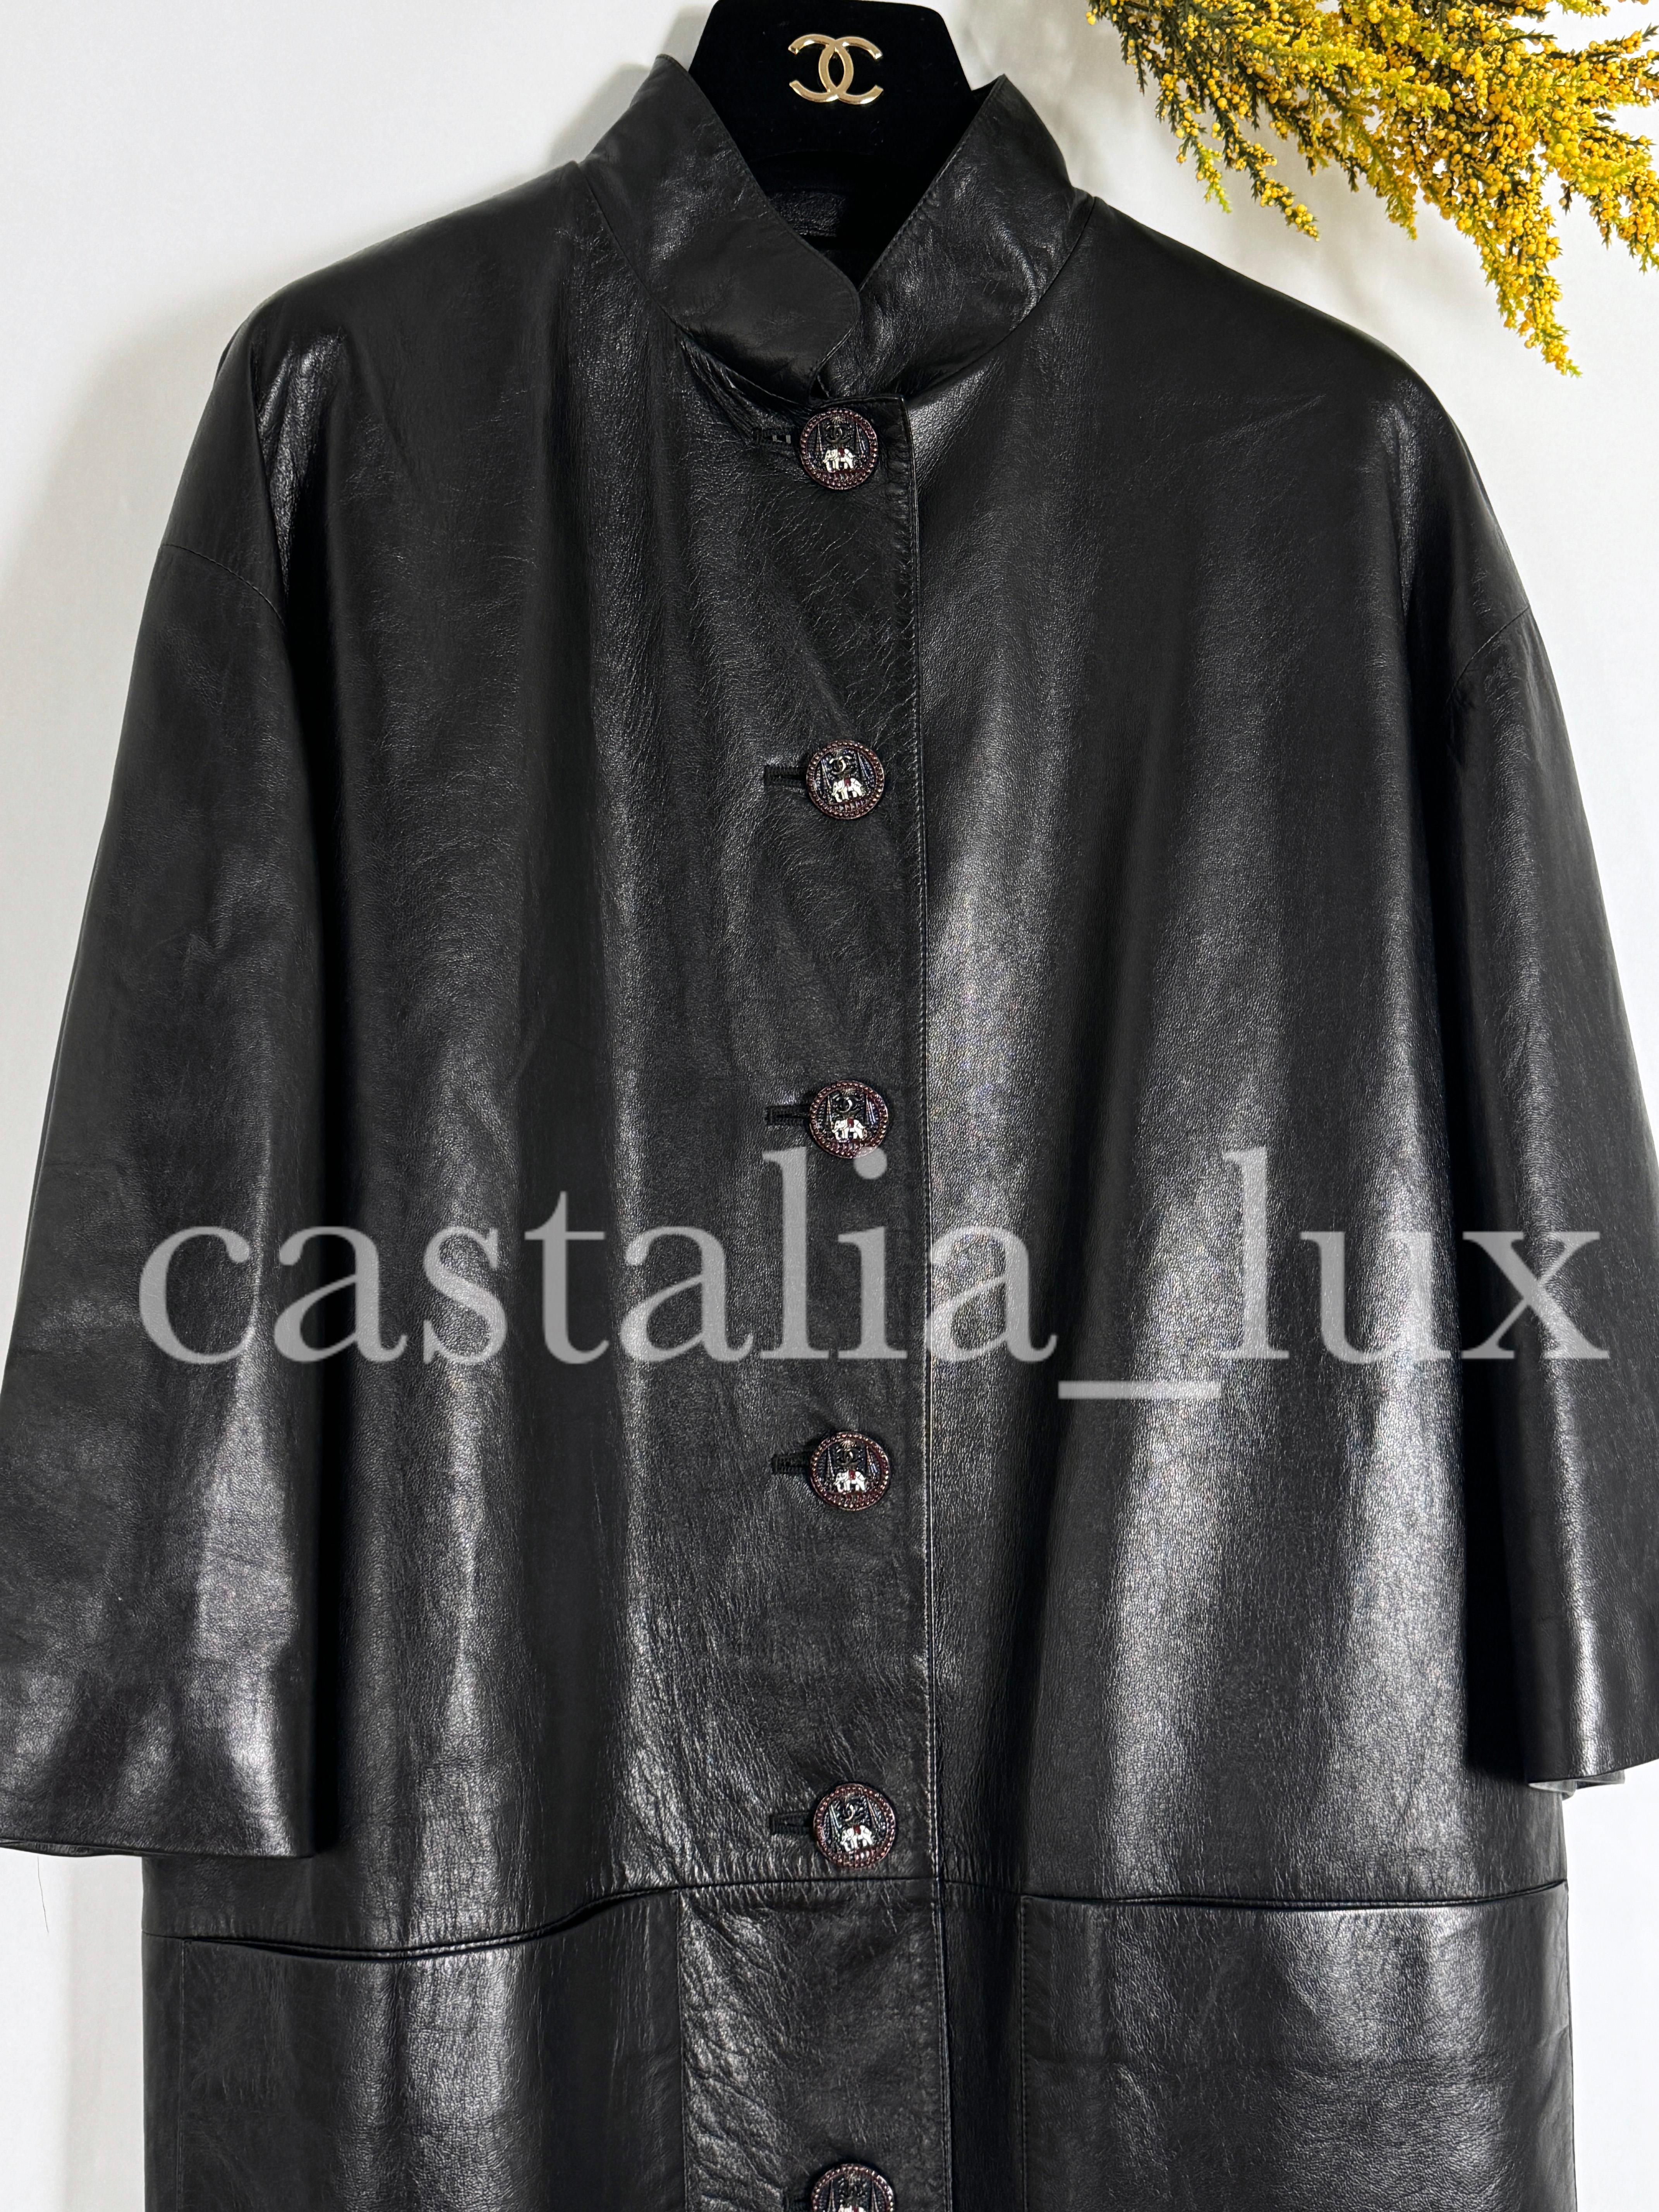 Chanel 10K Black Leather Jacket Coat with CC Jewel Buttons For Sale 4